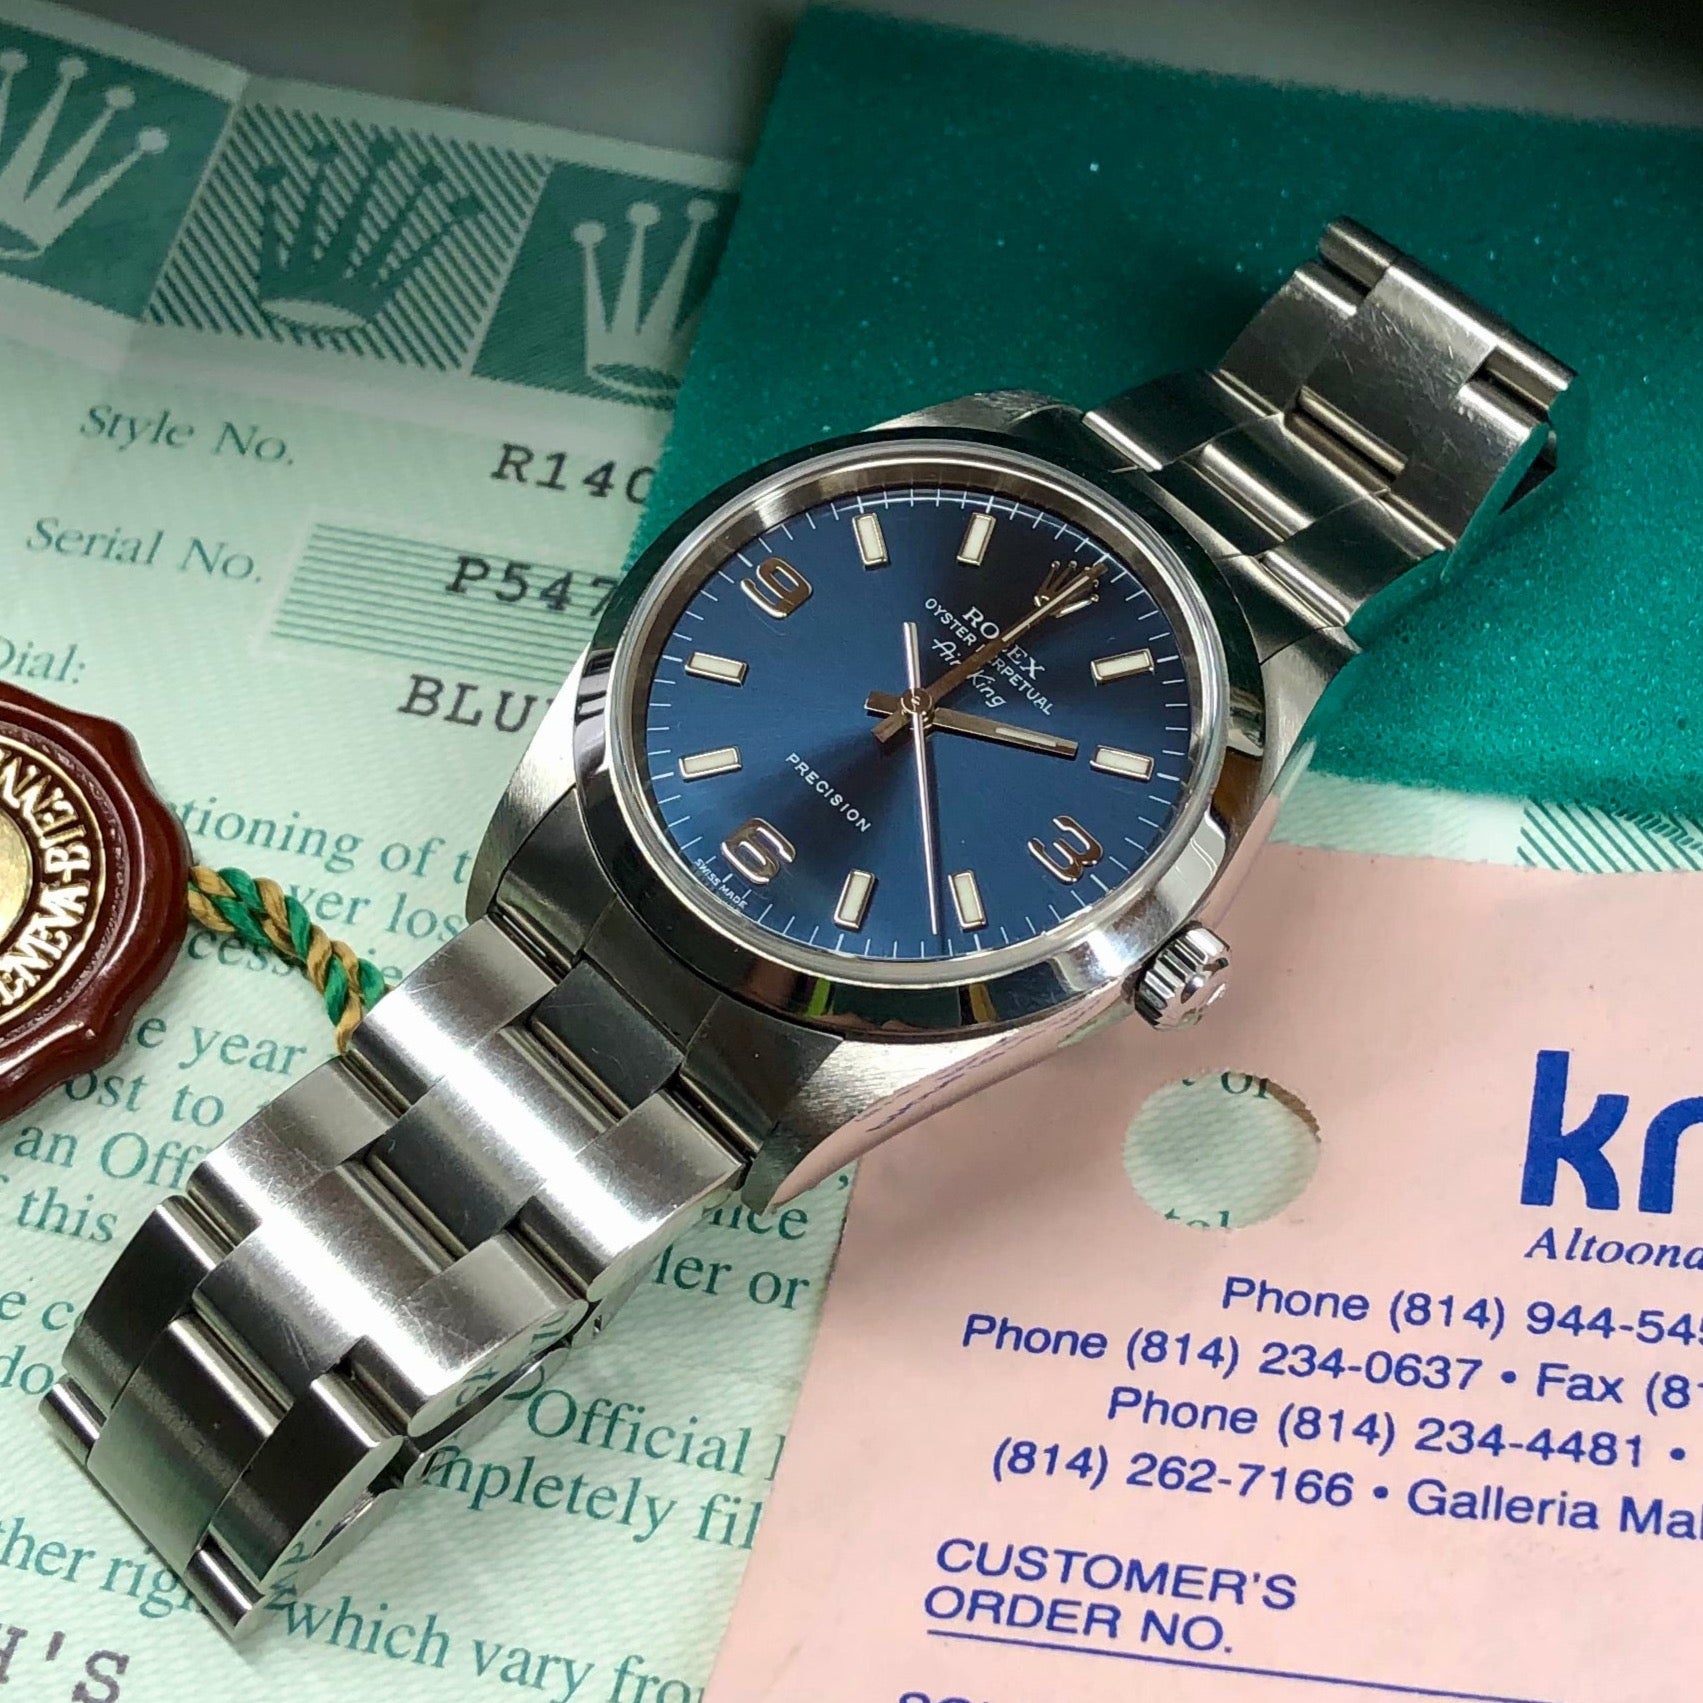 2000 Rolex Air King 14000 Blue Explorer Dial Stainless Steel Wristwatch Box Papers - Hashtag Watch Company